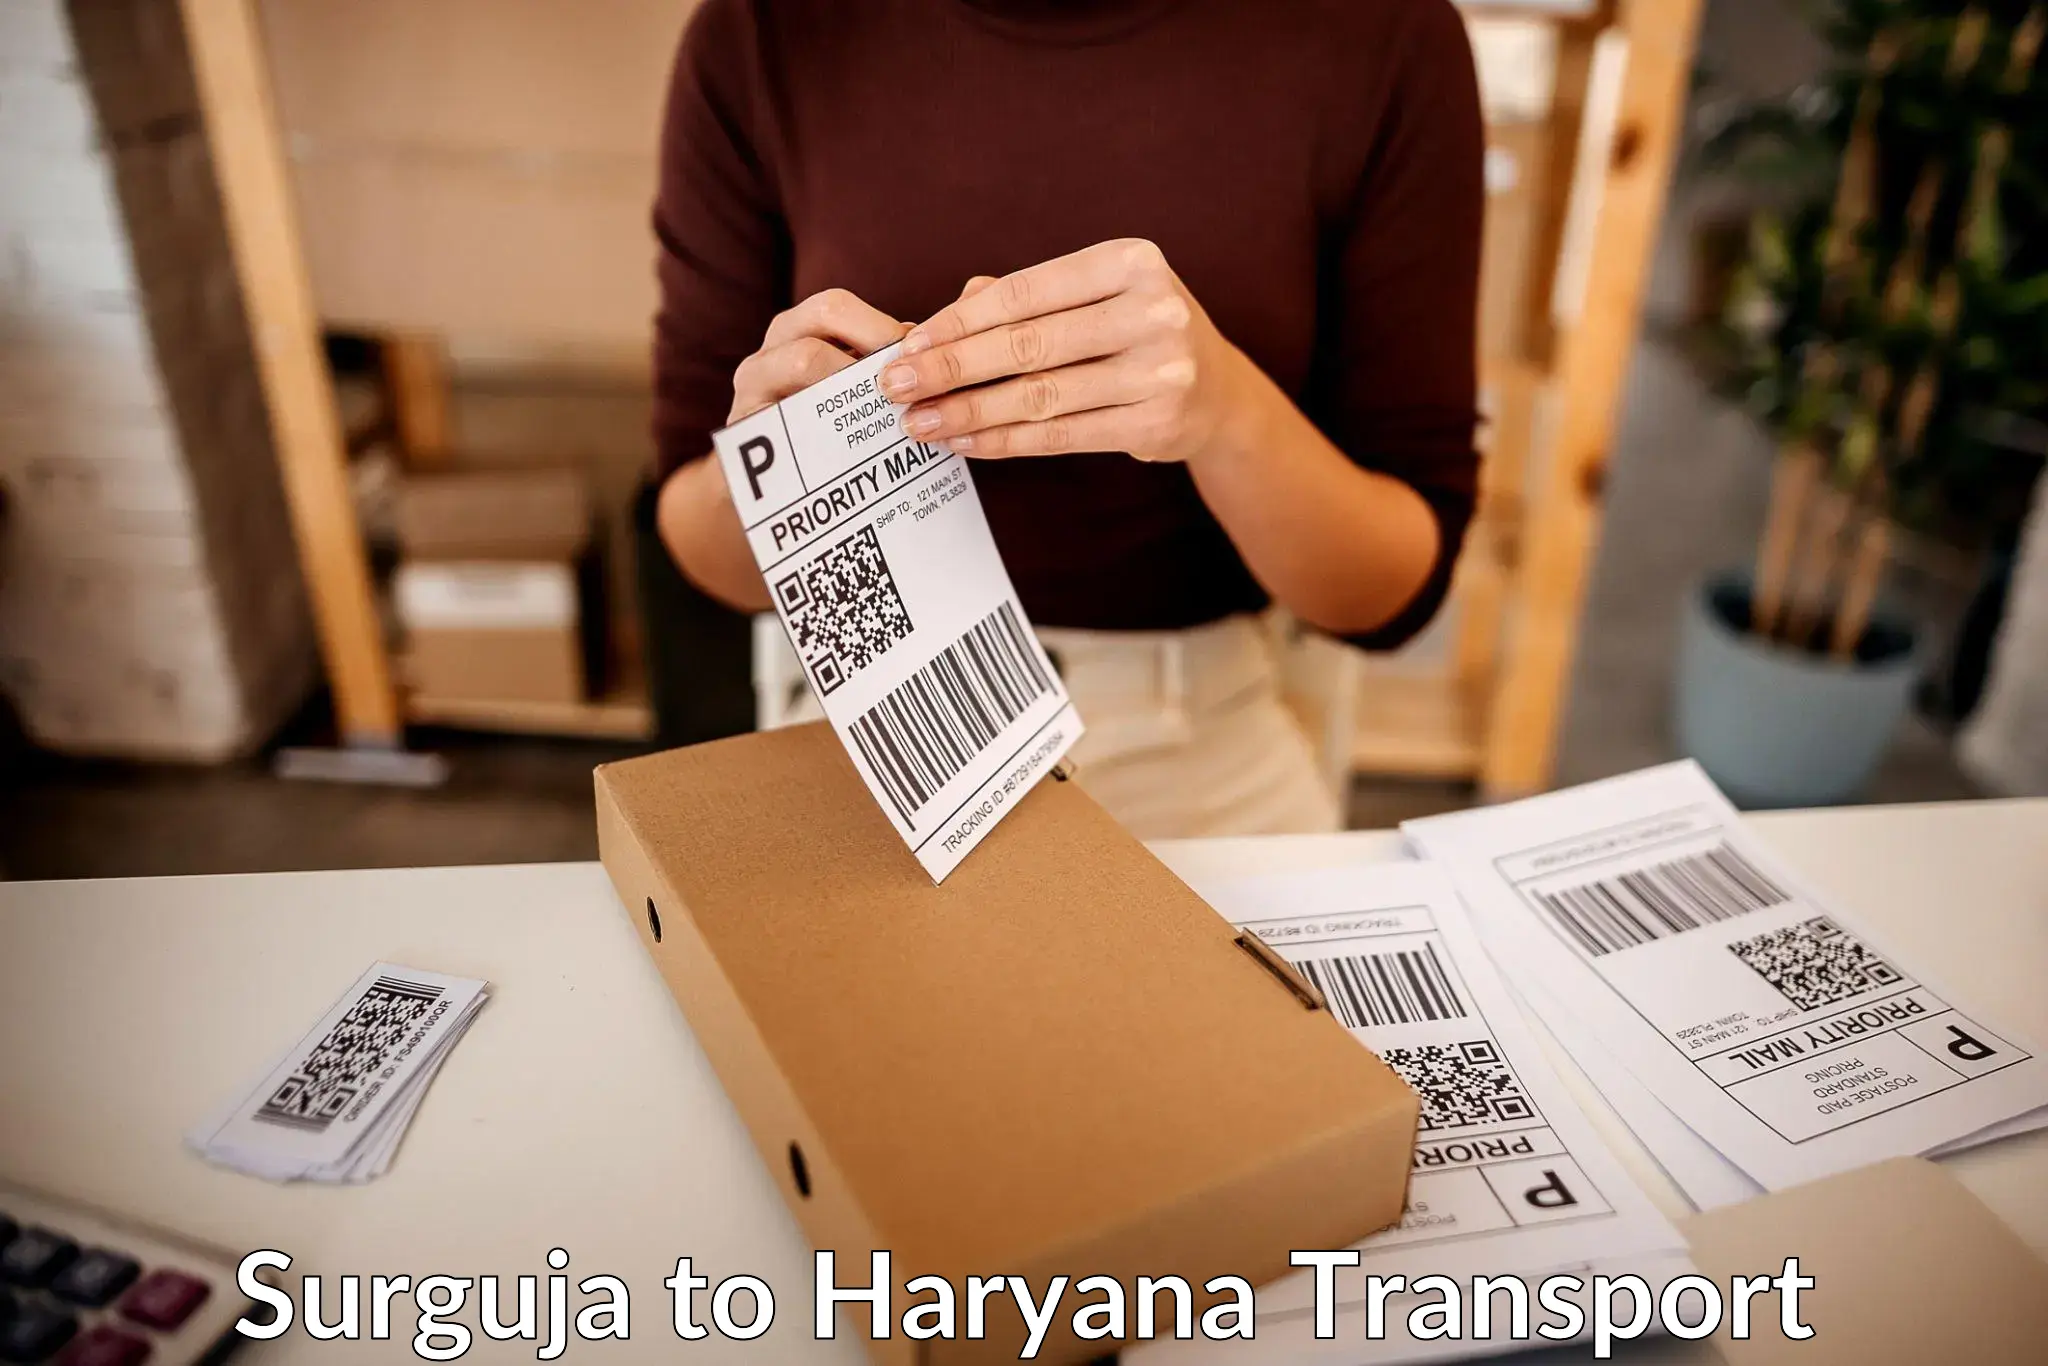 Container transport service Surguja to Gurgaon